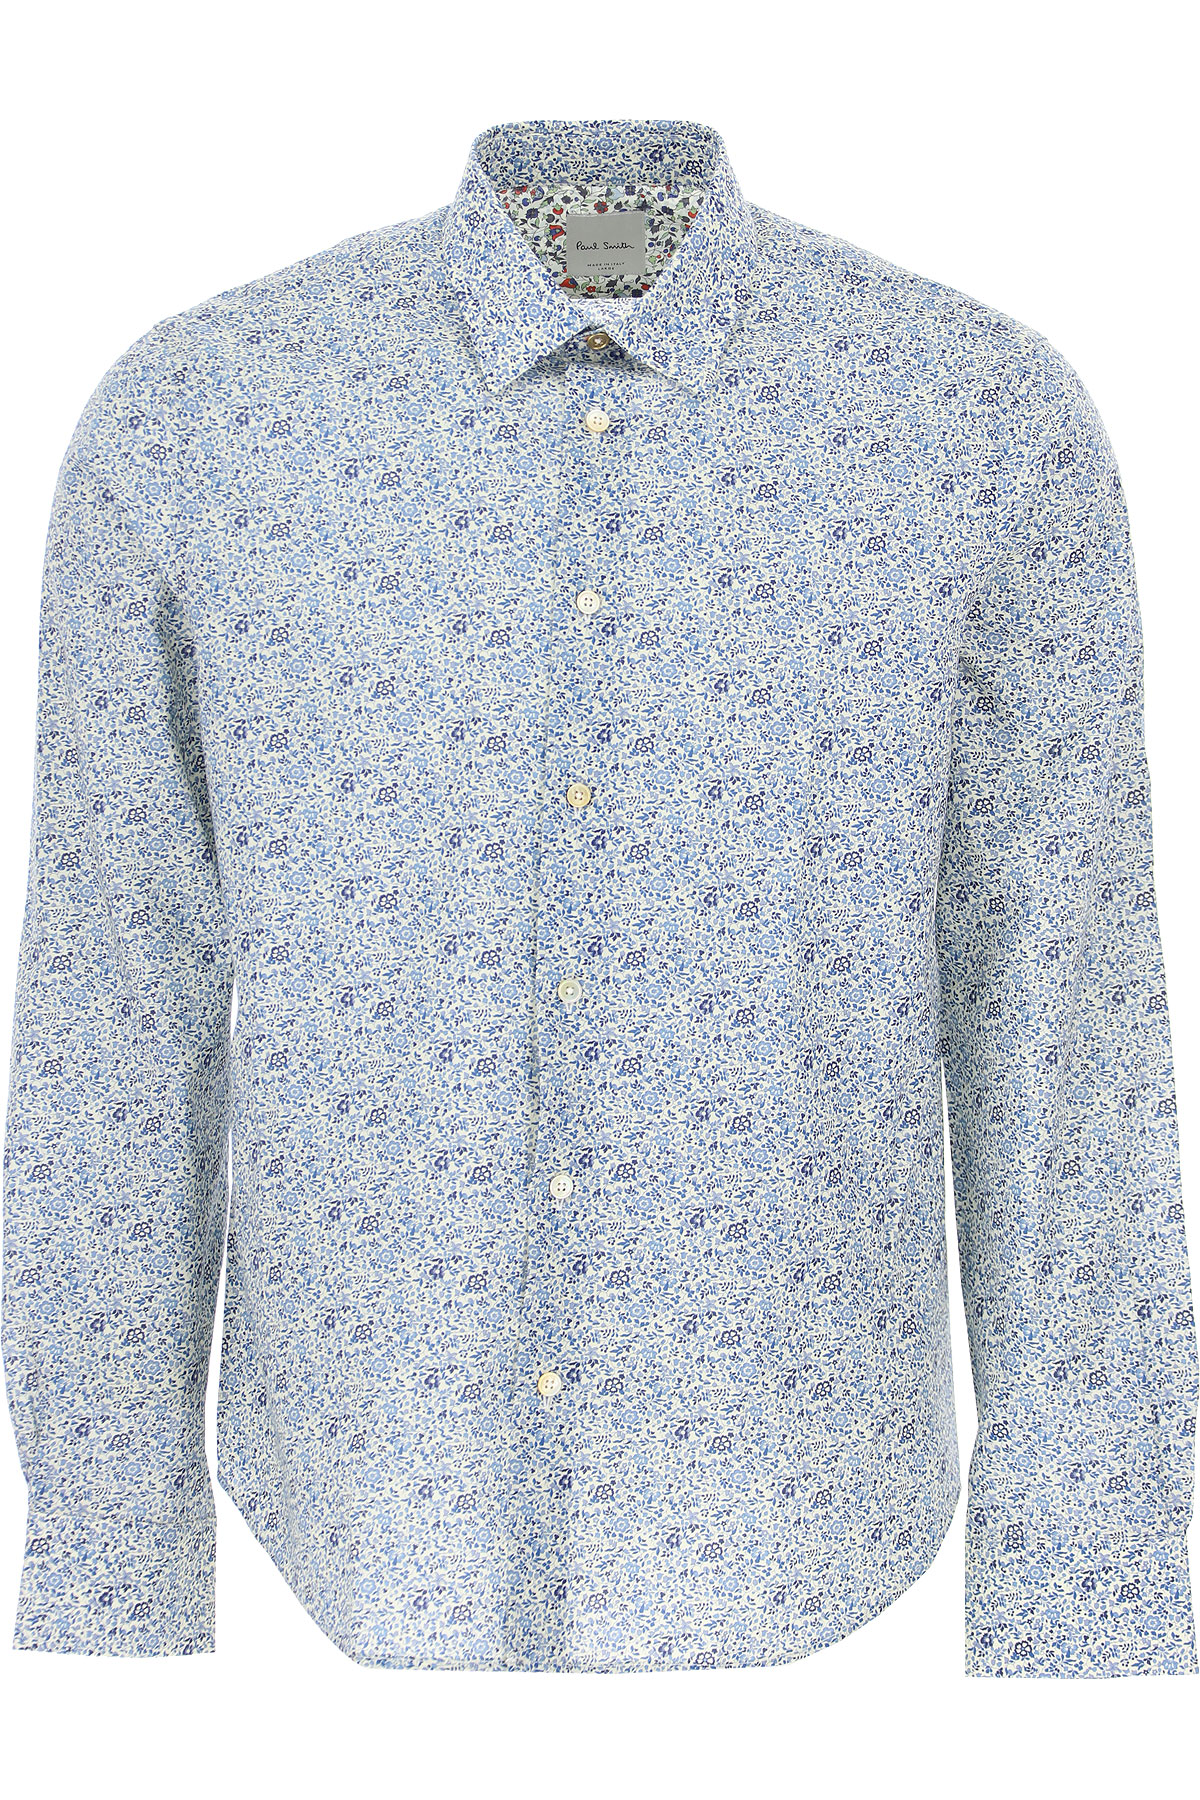 Mens Clothing Paul Smith, Style code: m1r-006l-e01141